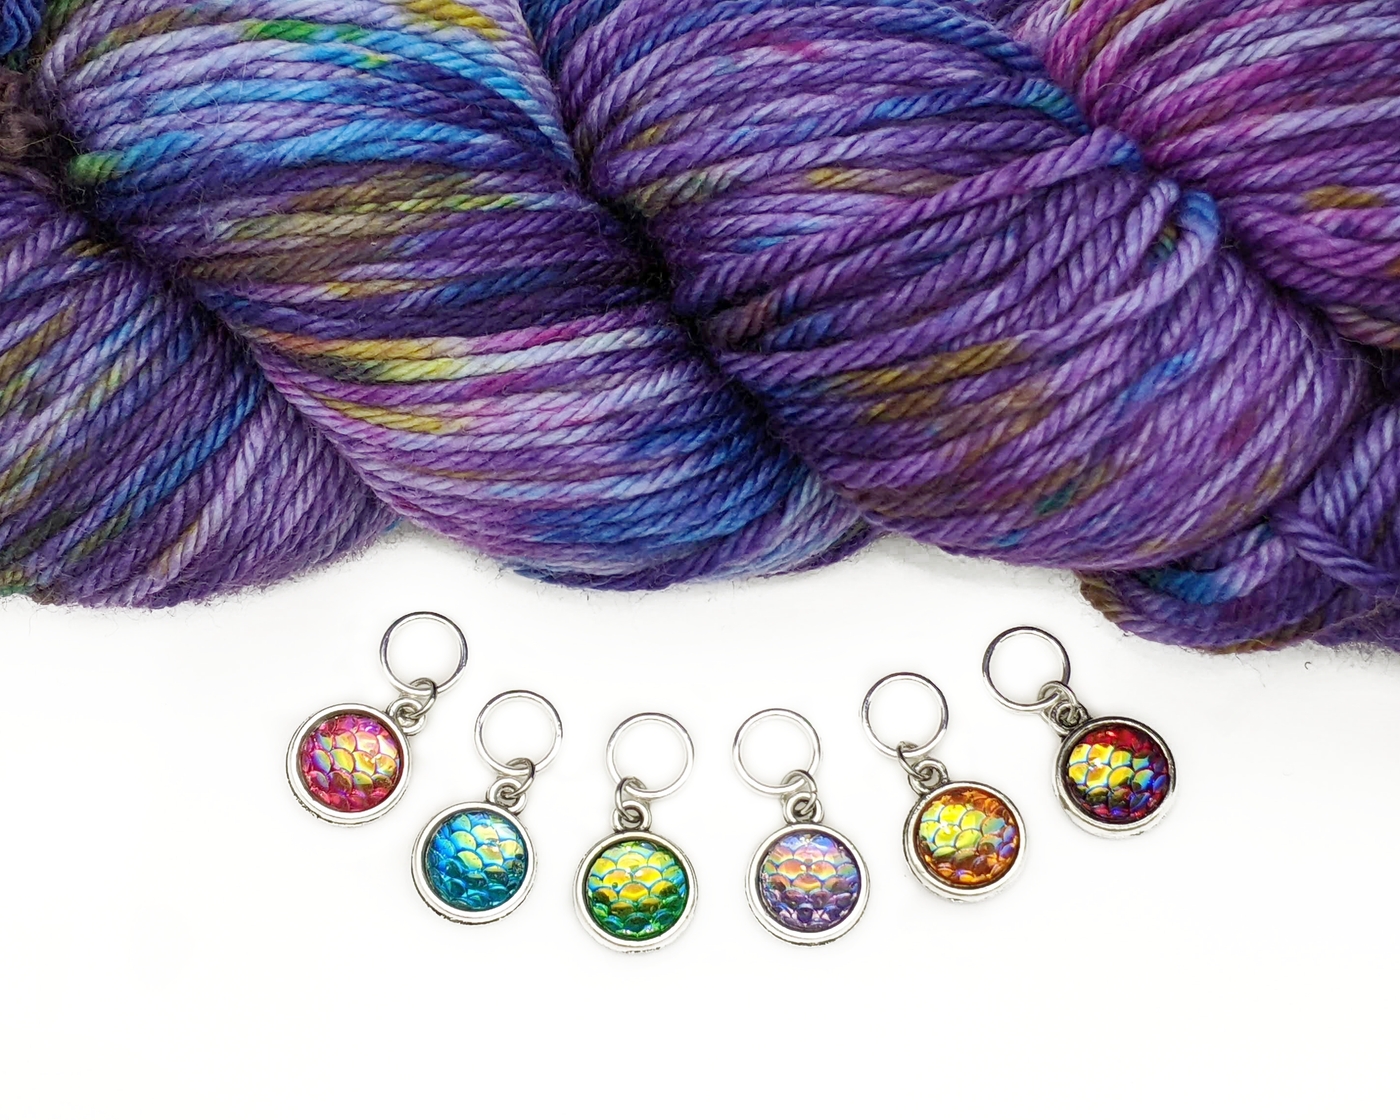 Tropical Drinks Stitch Markers for Knitting